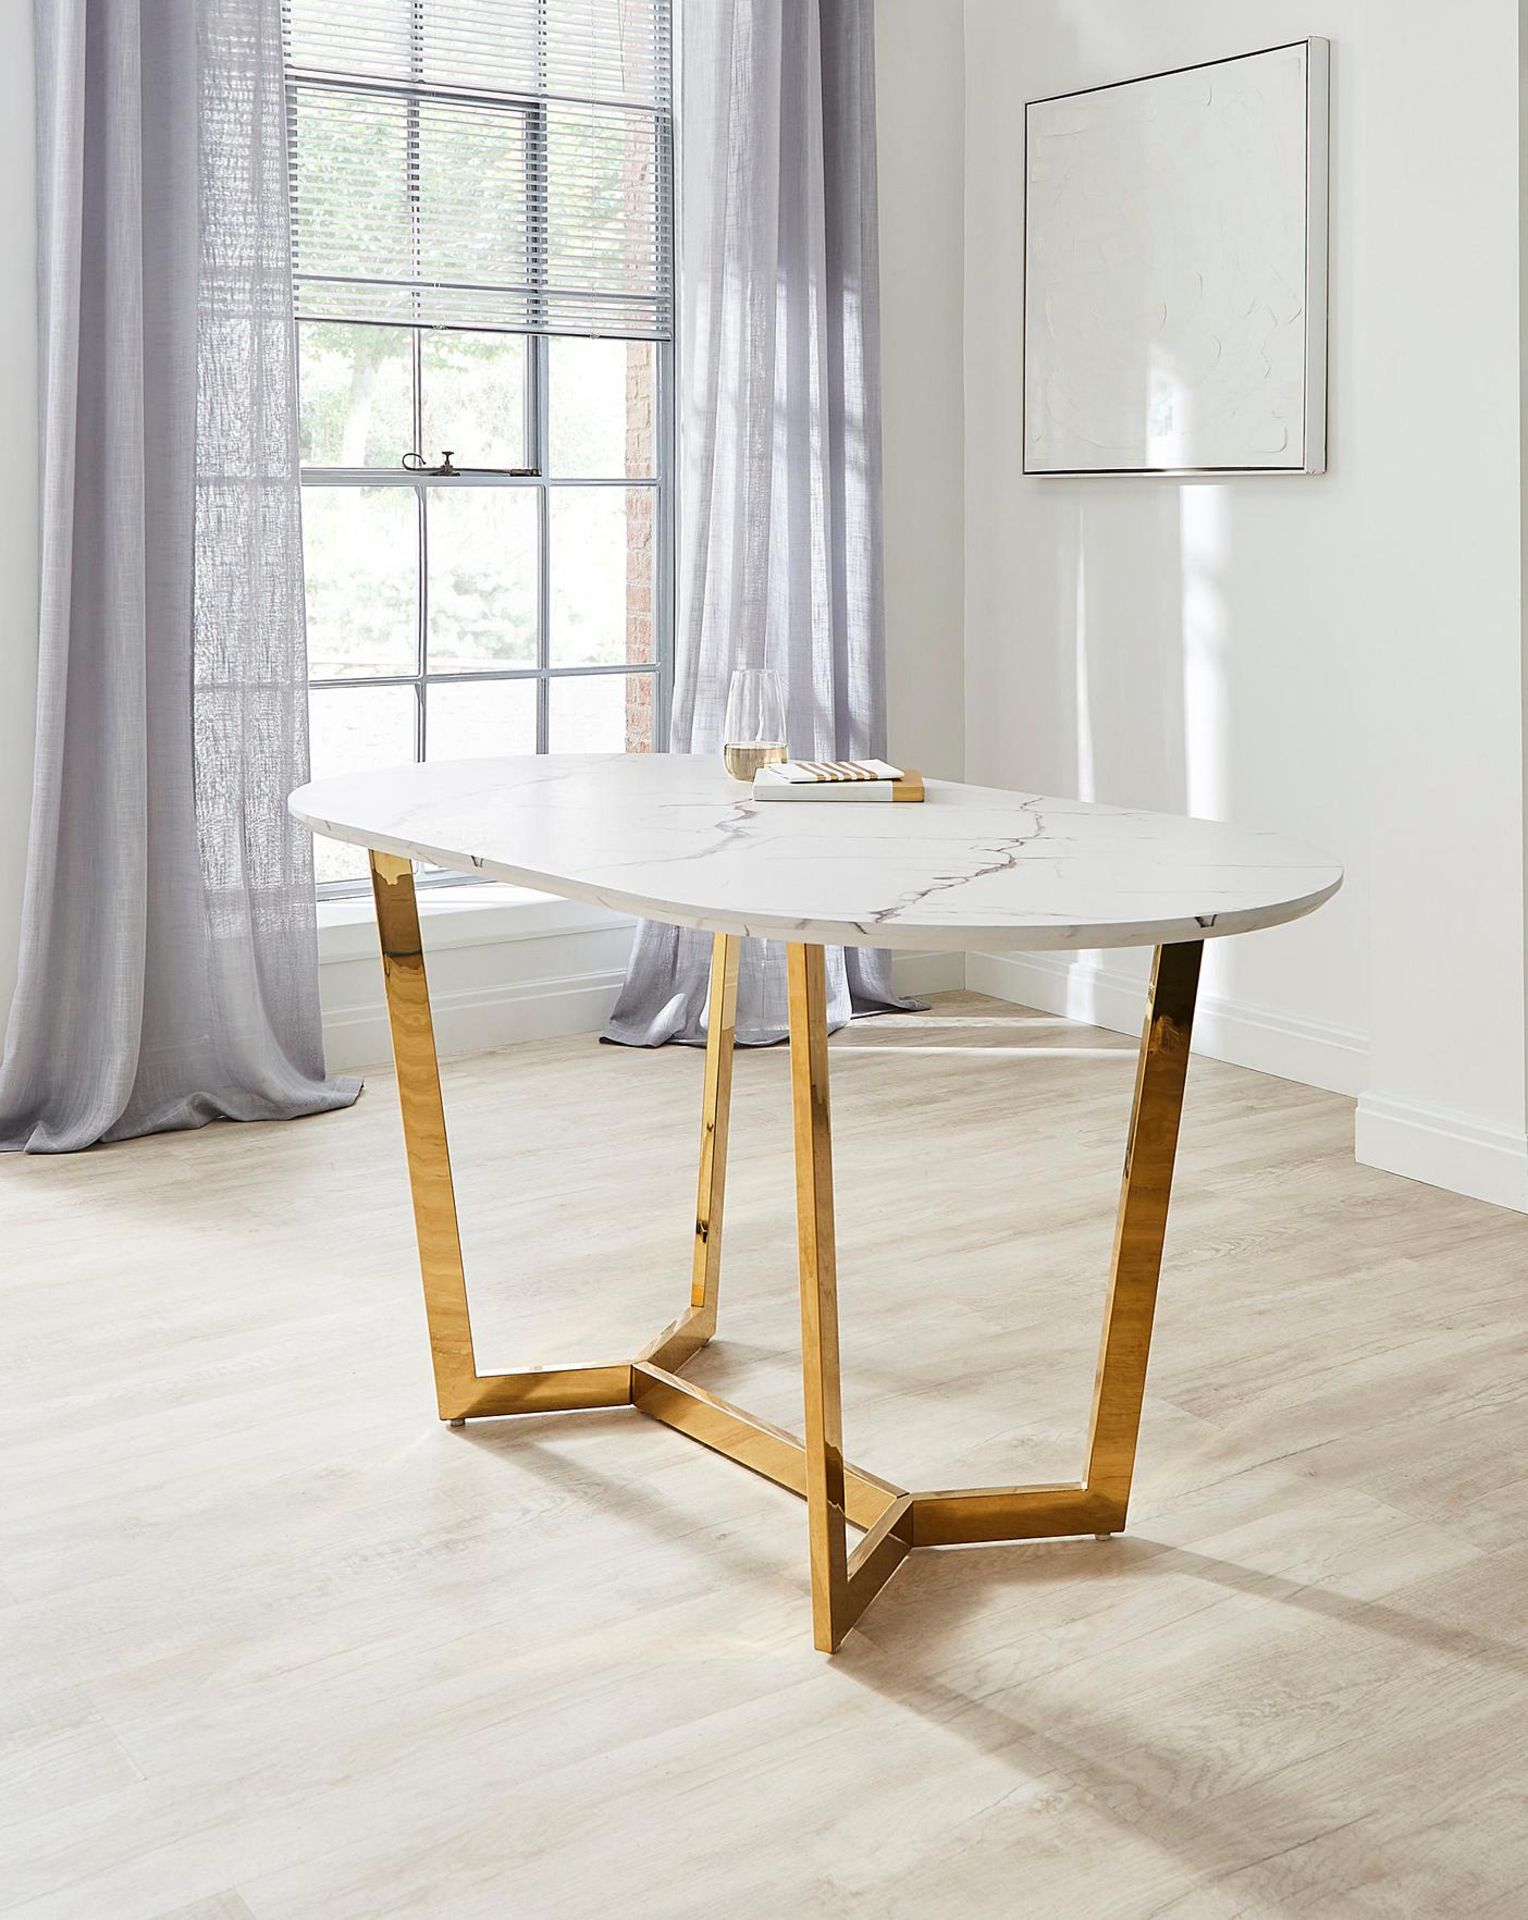 NEW & BOXED JOANNA HOPE Florence Oval Dining Table - MARBLE/GOLD. RRP £449. Part of the Joanna - Image 2 of 2